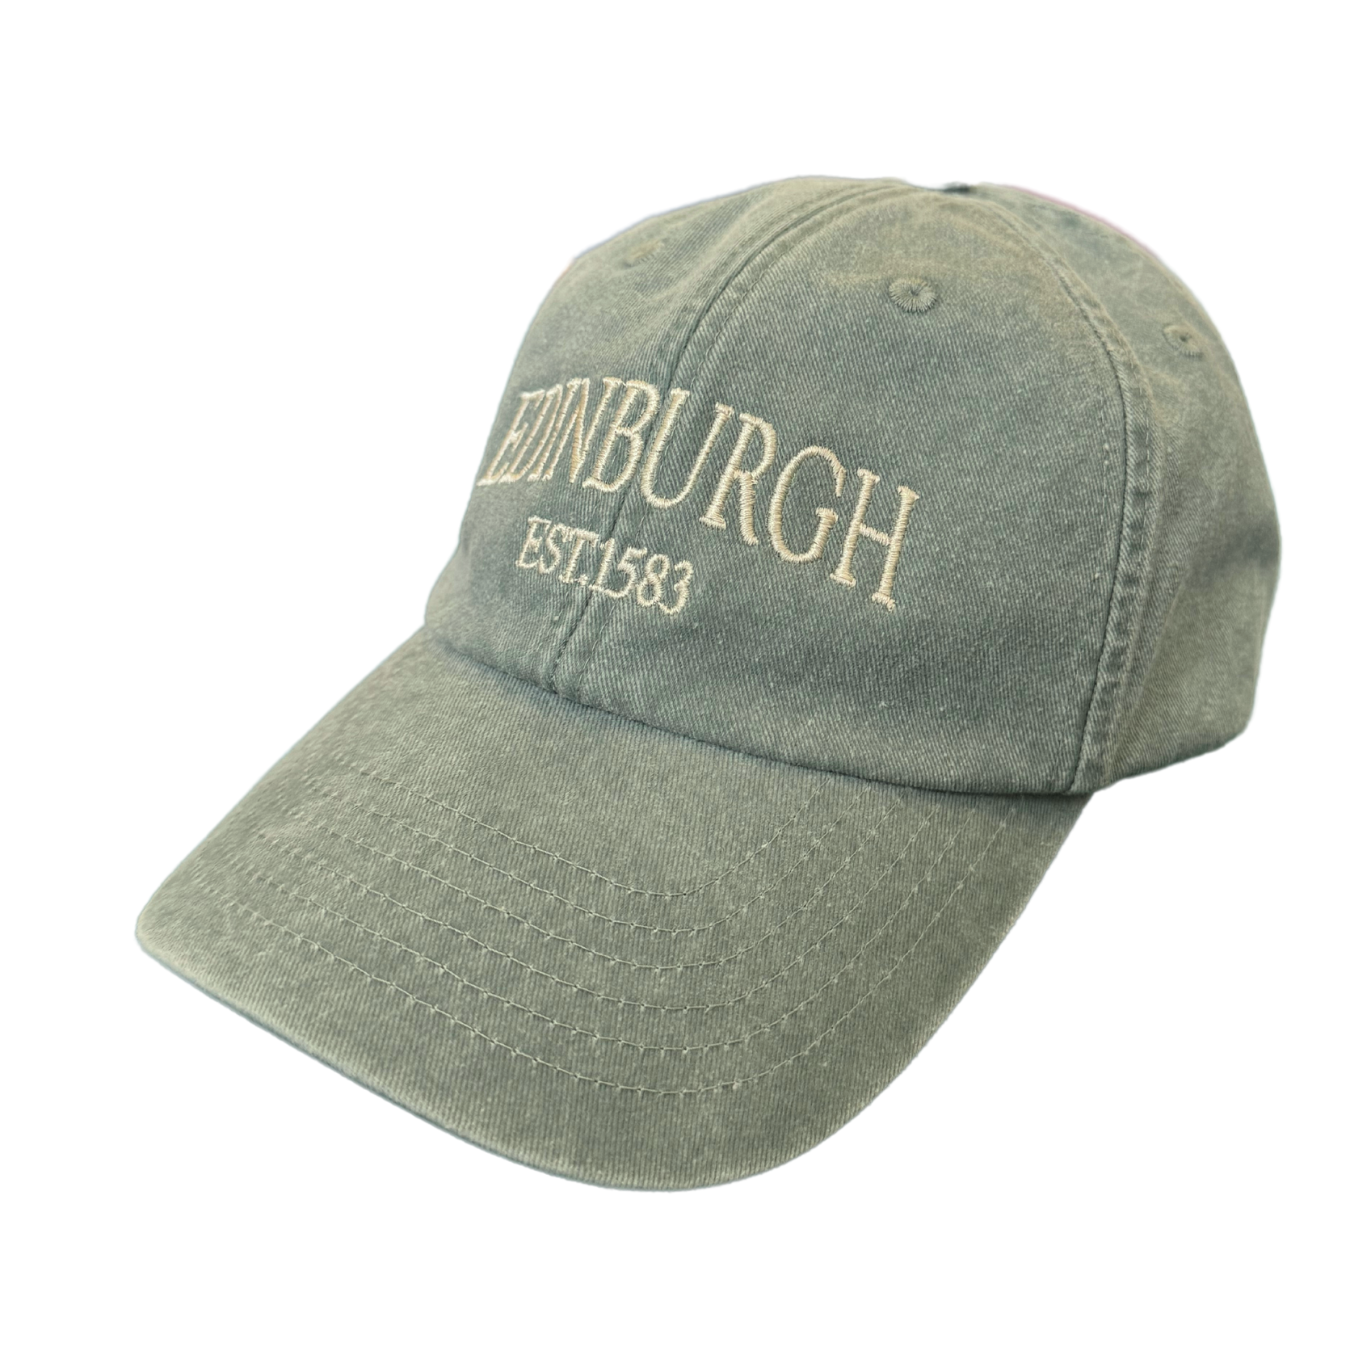 sage green vintage baseball cap with 'Edinburgh EST. 1583' embroidered text in an off white thread against a white background